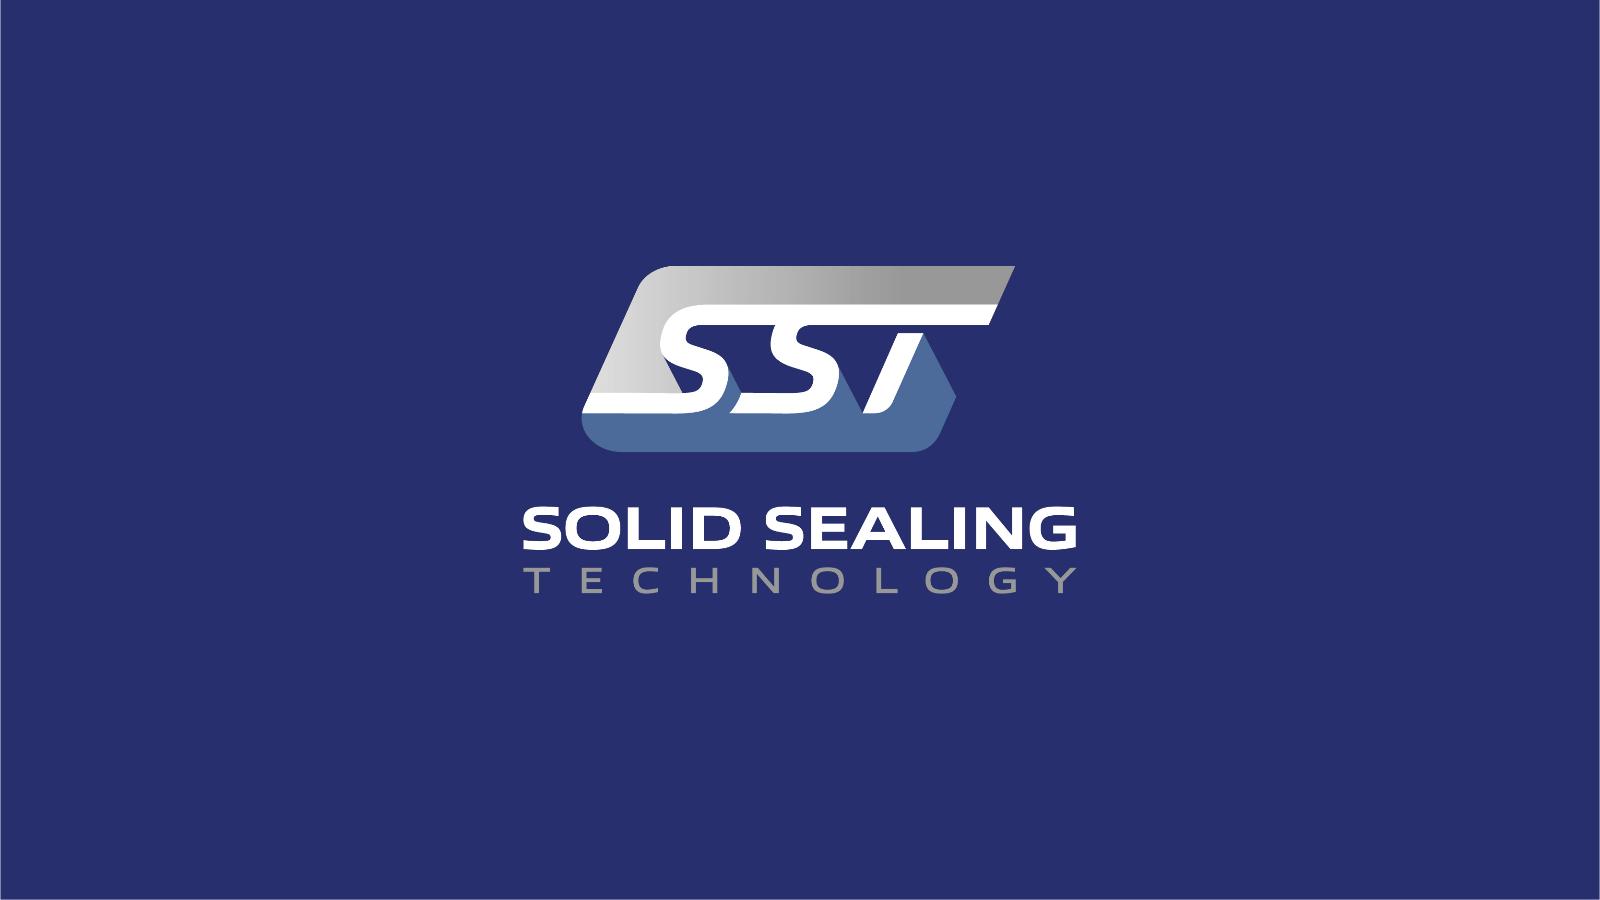 Solid Sealing Technology | Vertical knock-out Logo on Dark